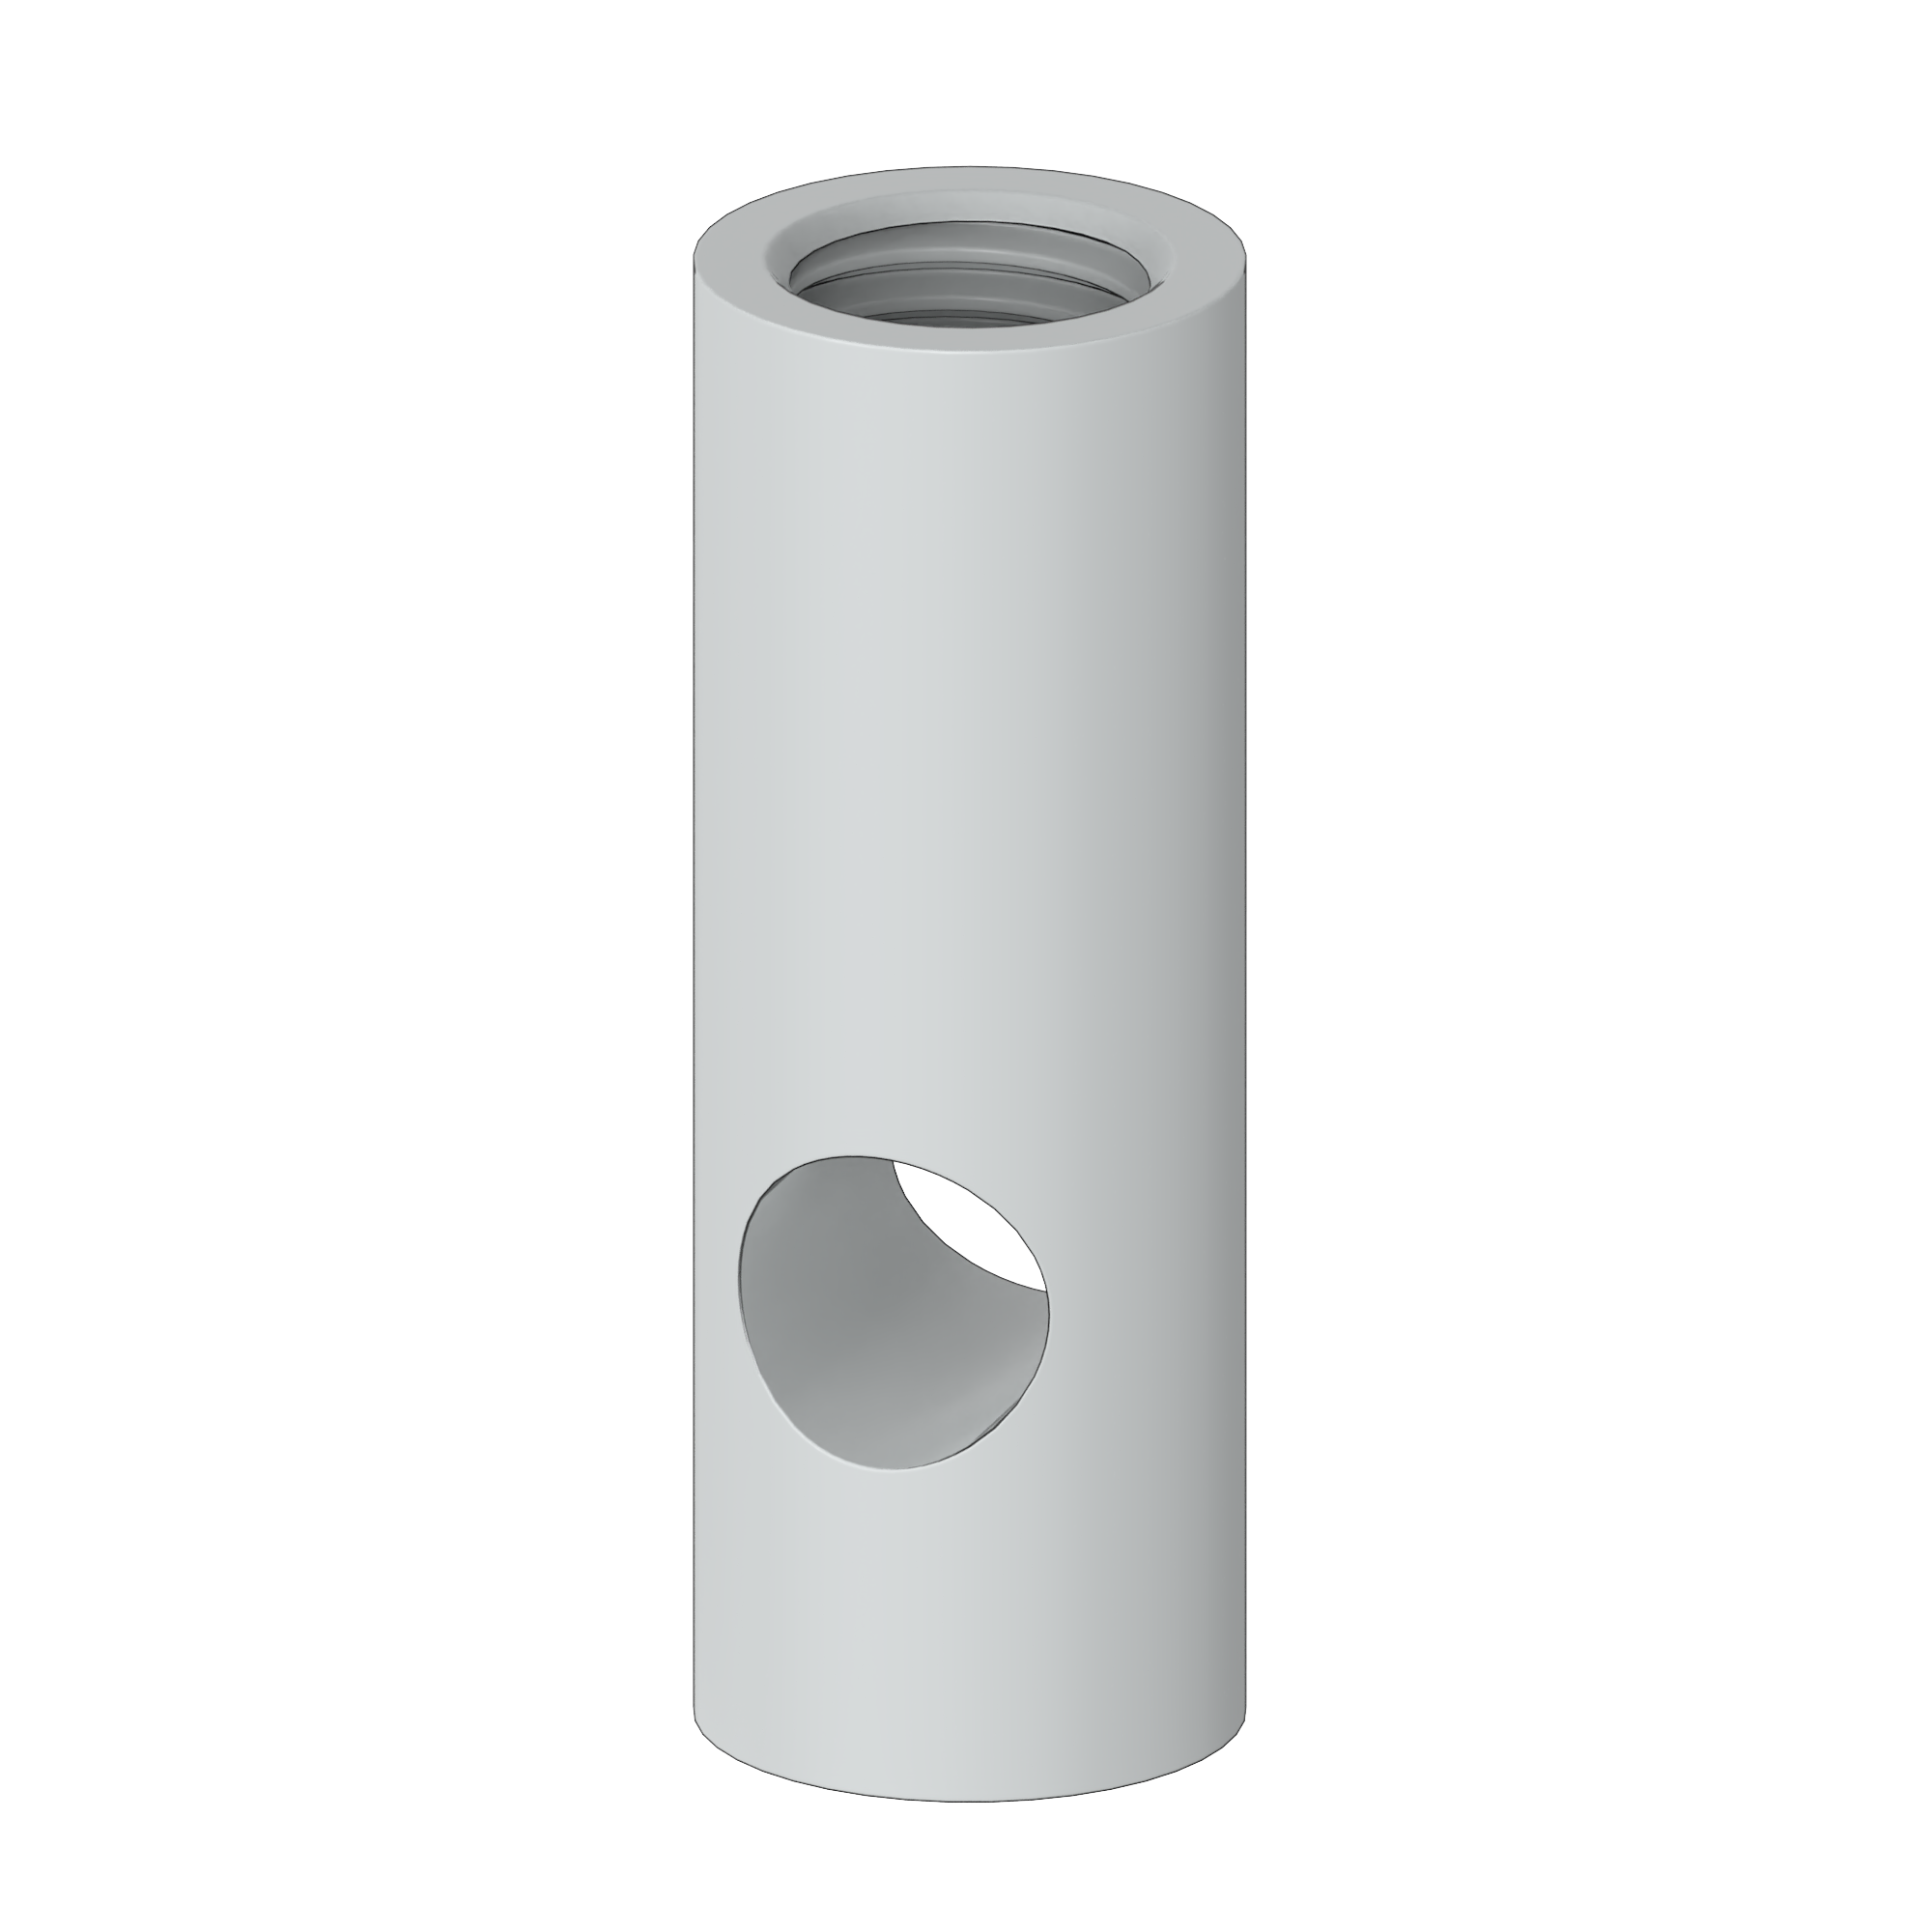 Solid cross hole 3D image